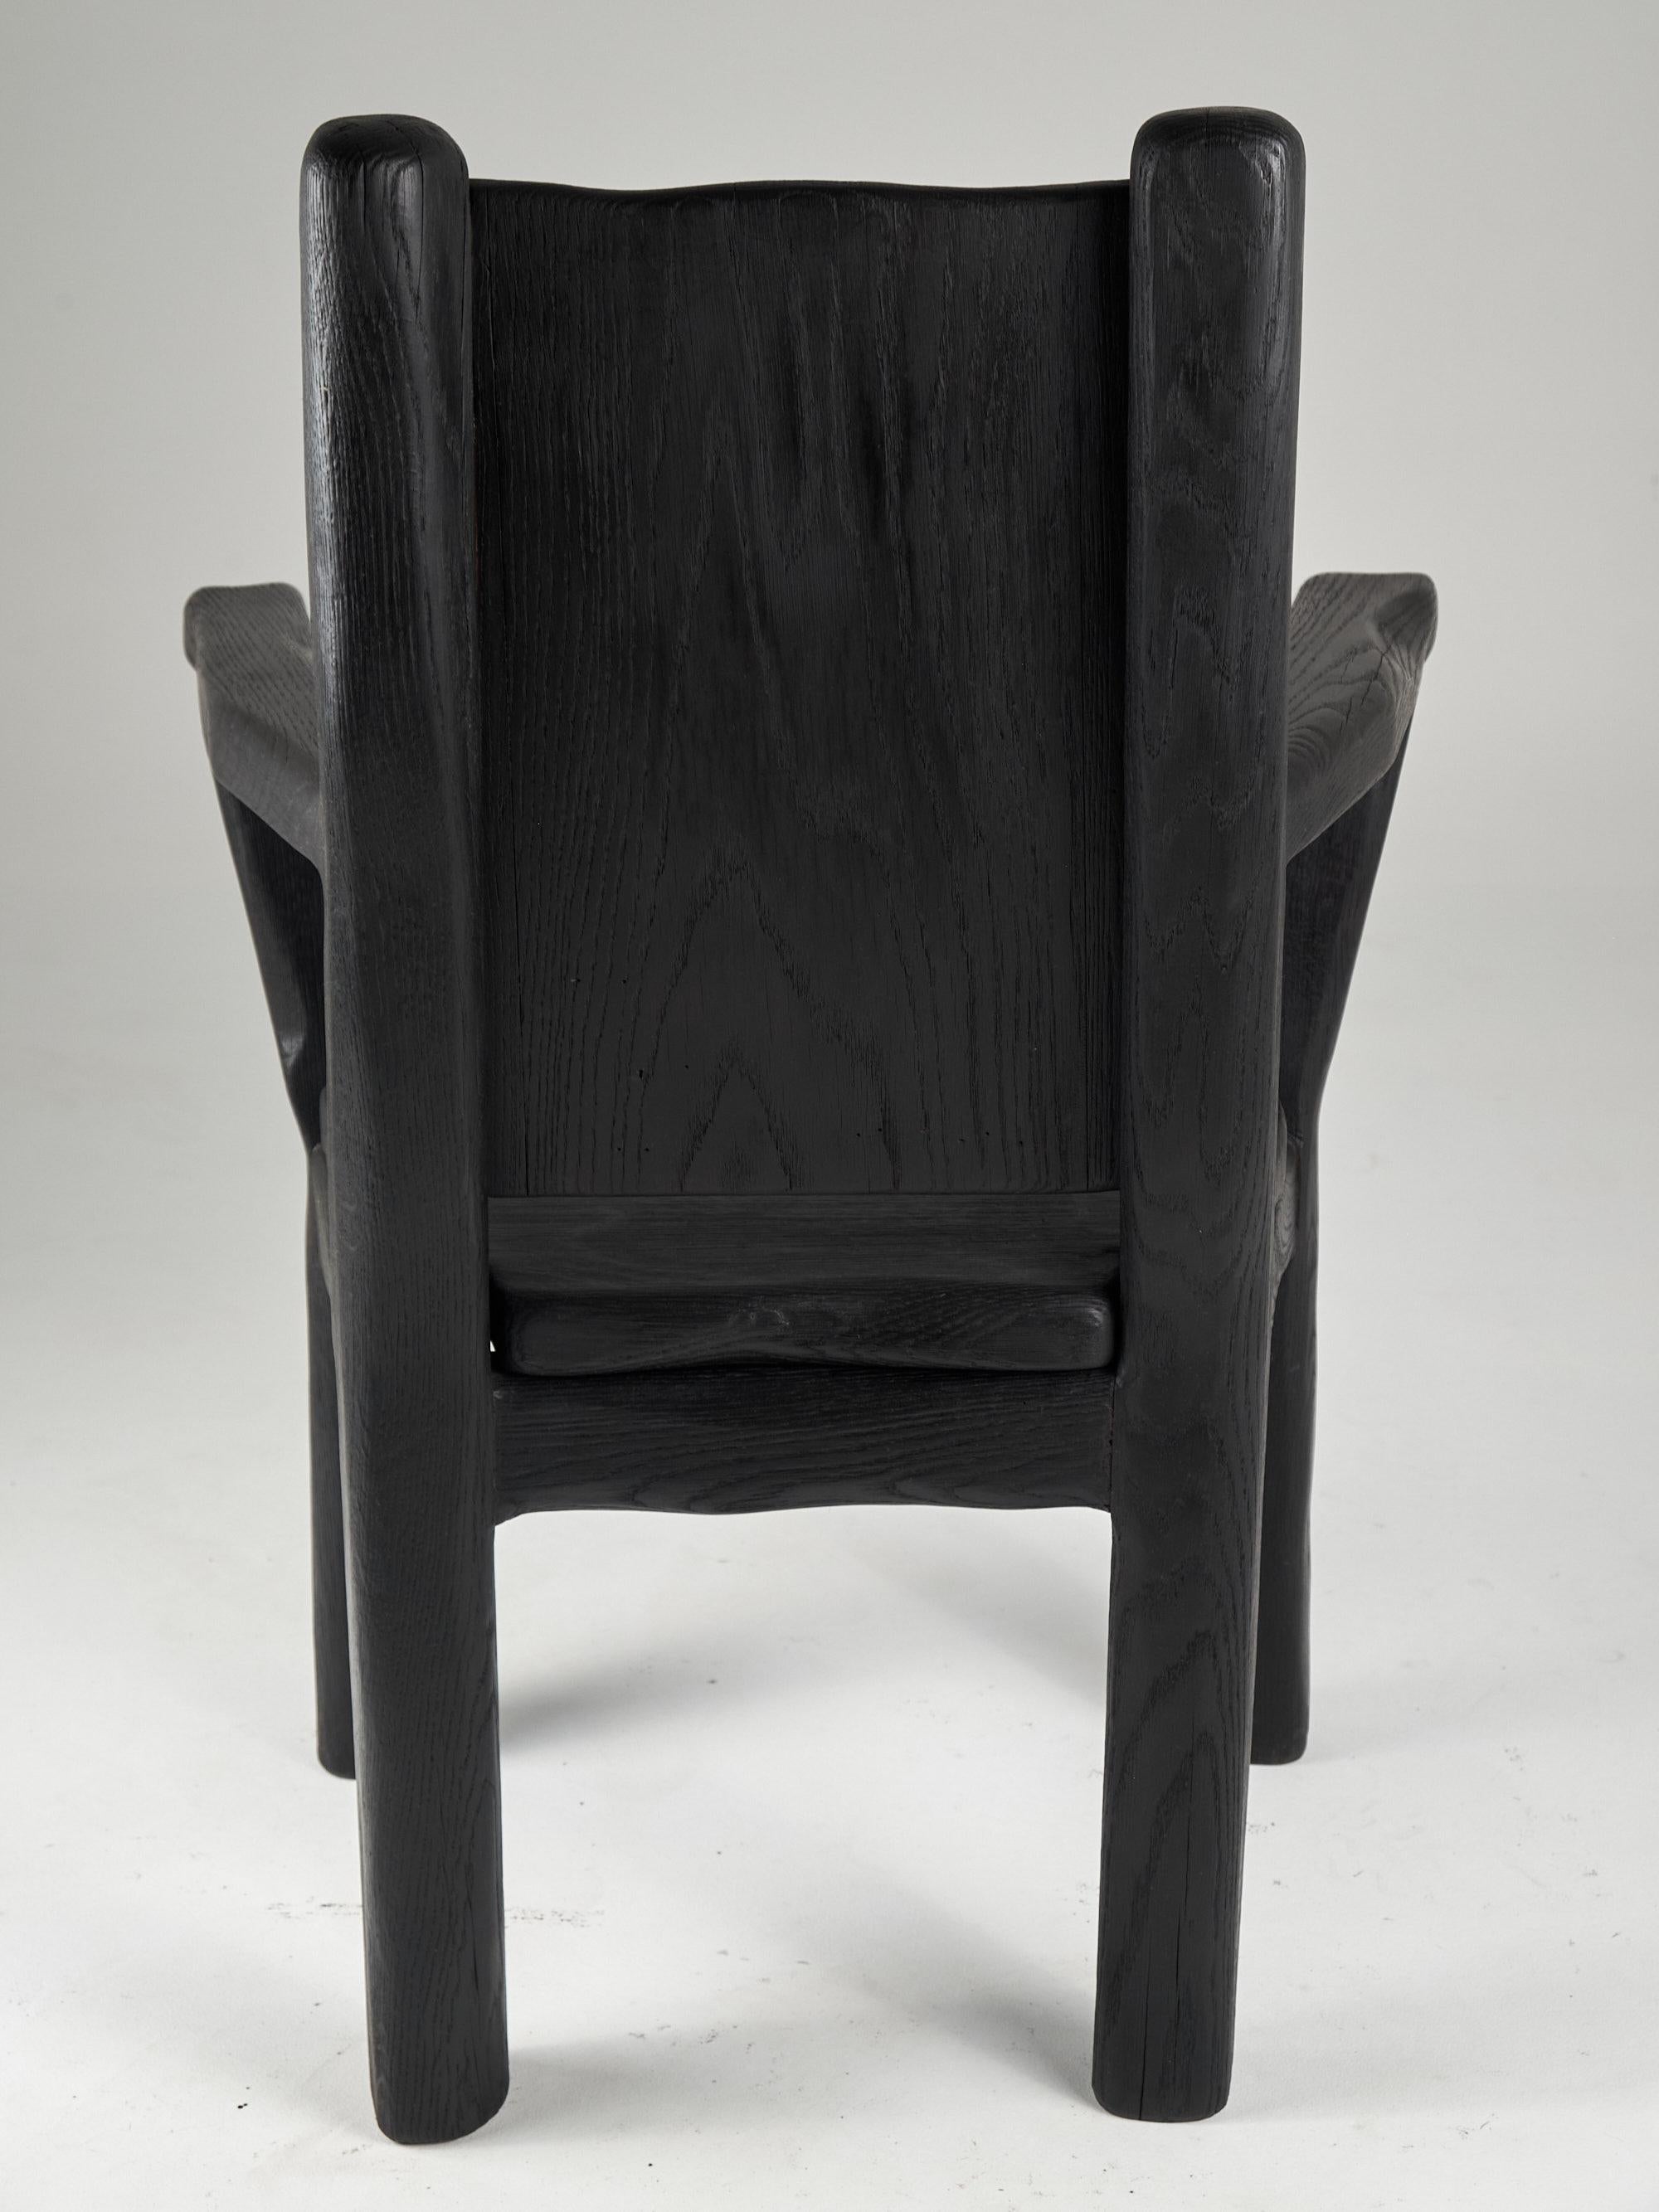 Massive Oak Armchair, Rustic, Burnt Black, For Generations to Last For Sale 1